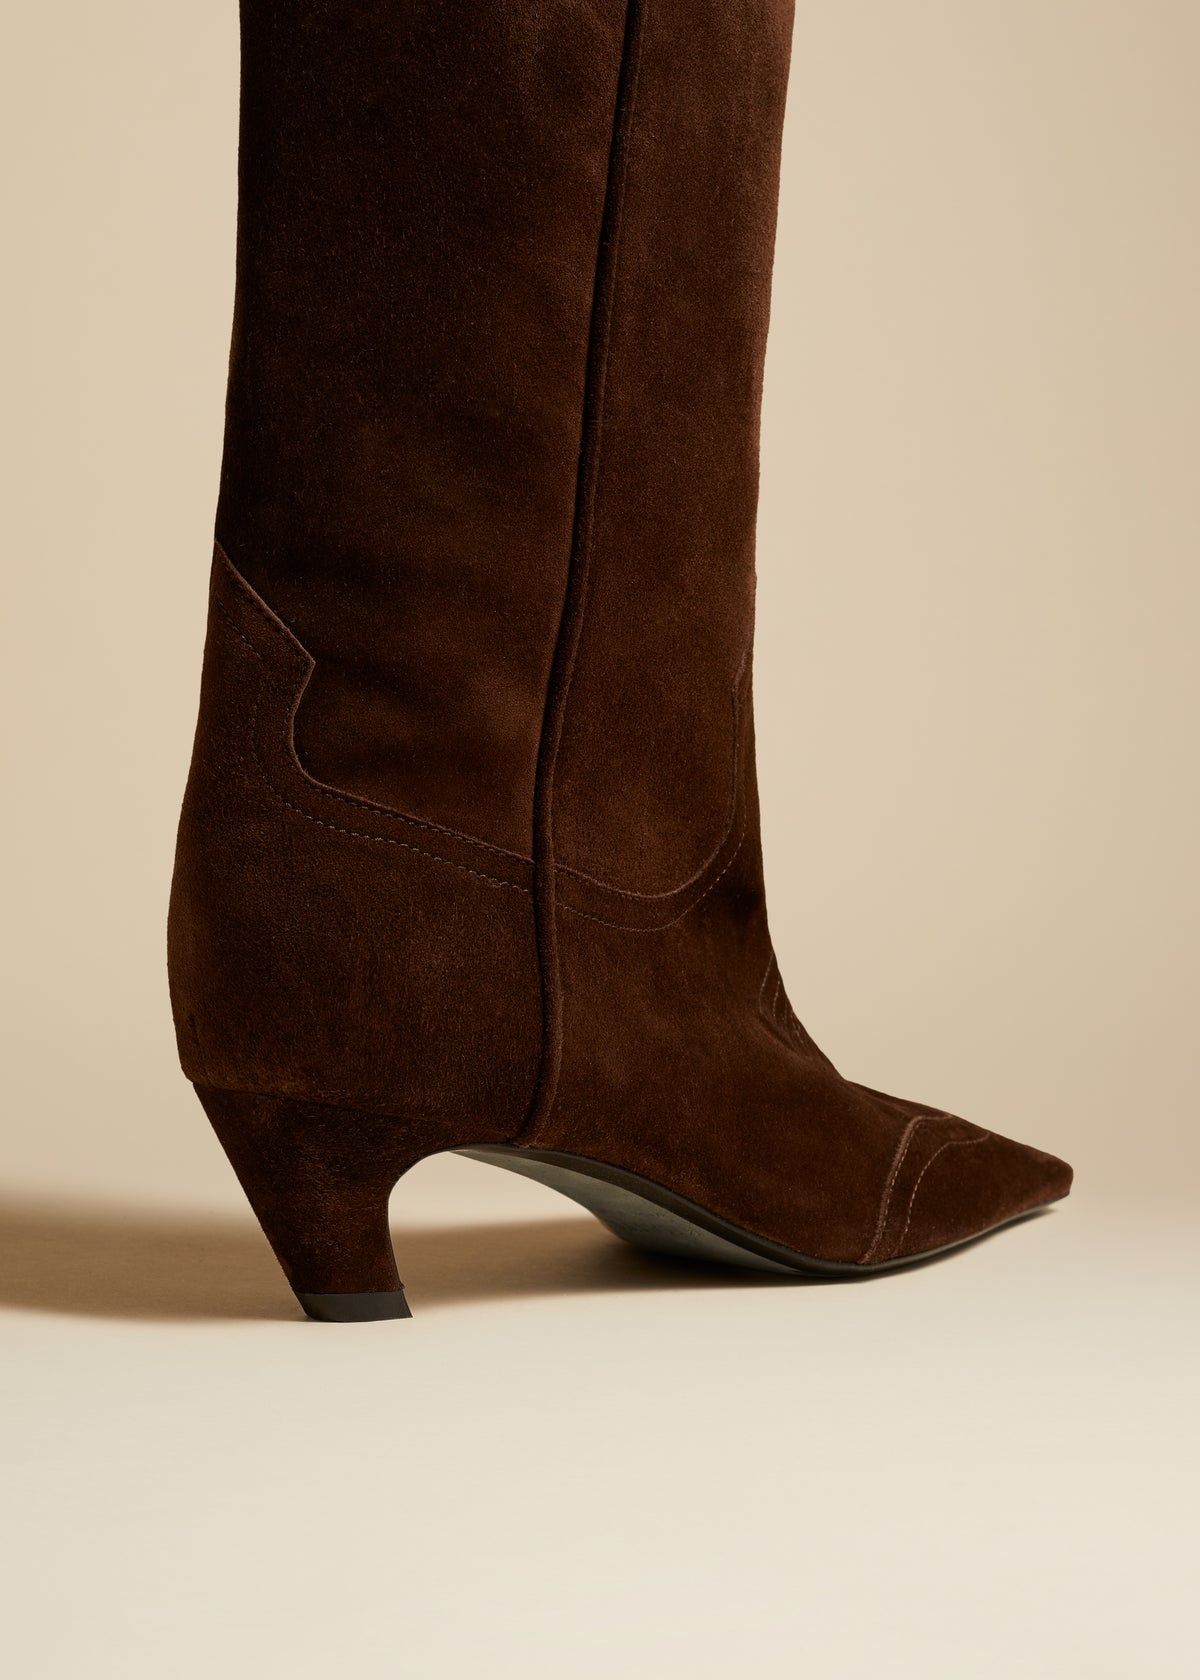 The Dallas Knee High Boot in Coffee Suede - 3